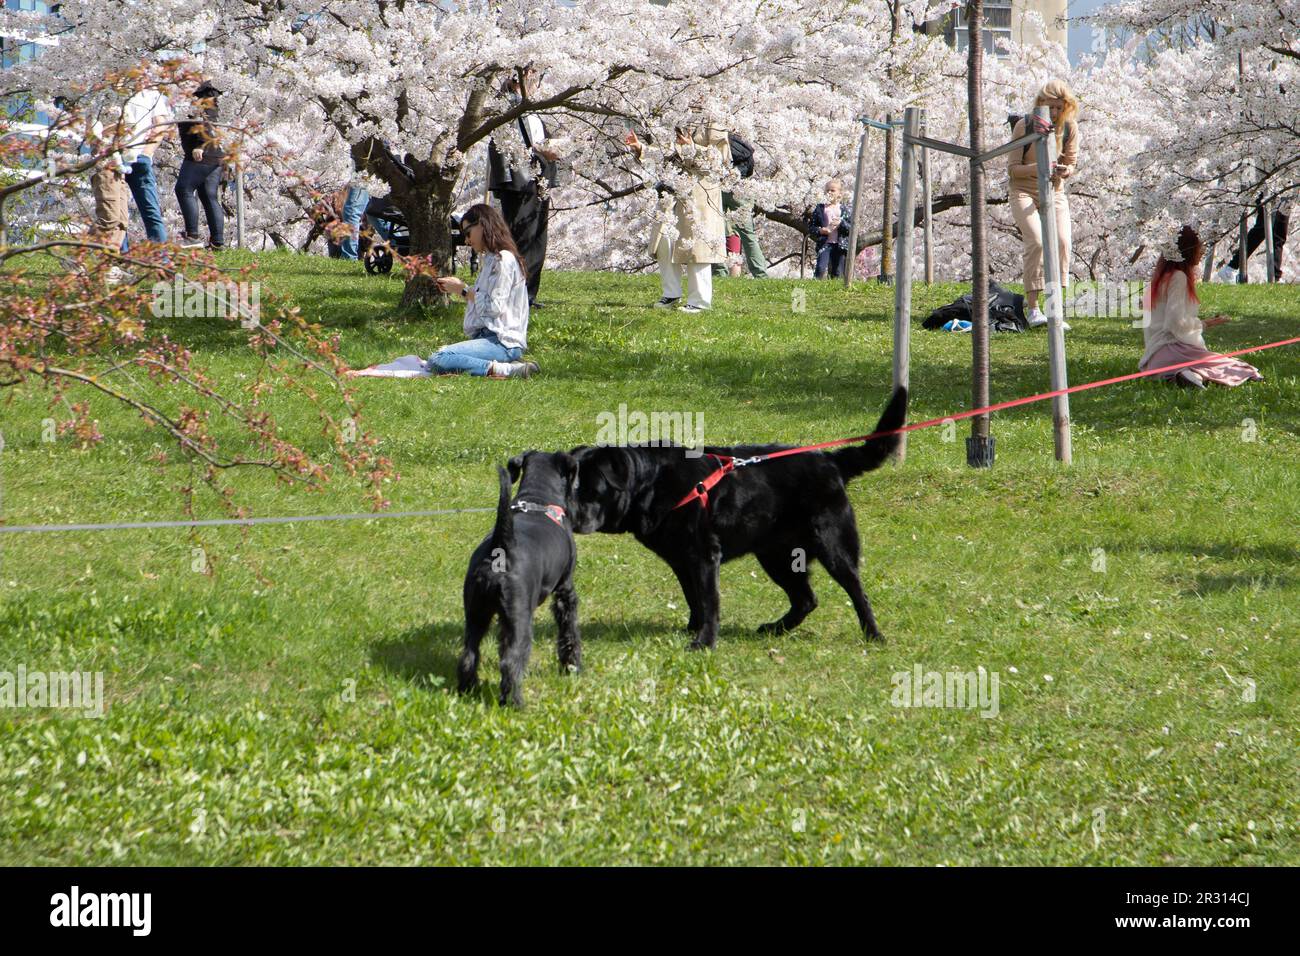 photo of two dogs on leashes in a crowded park Stock Photo